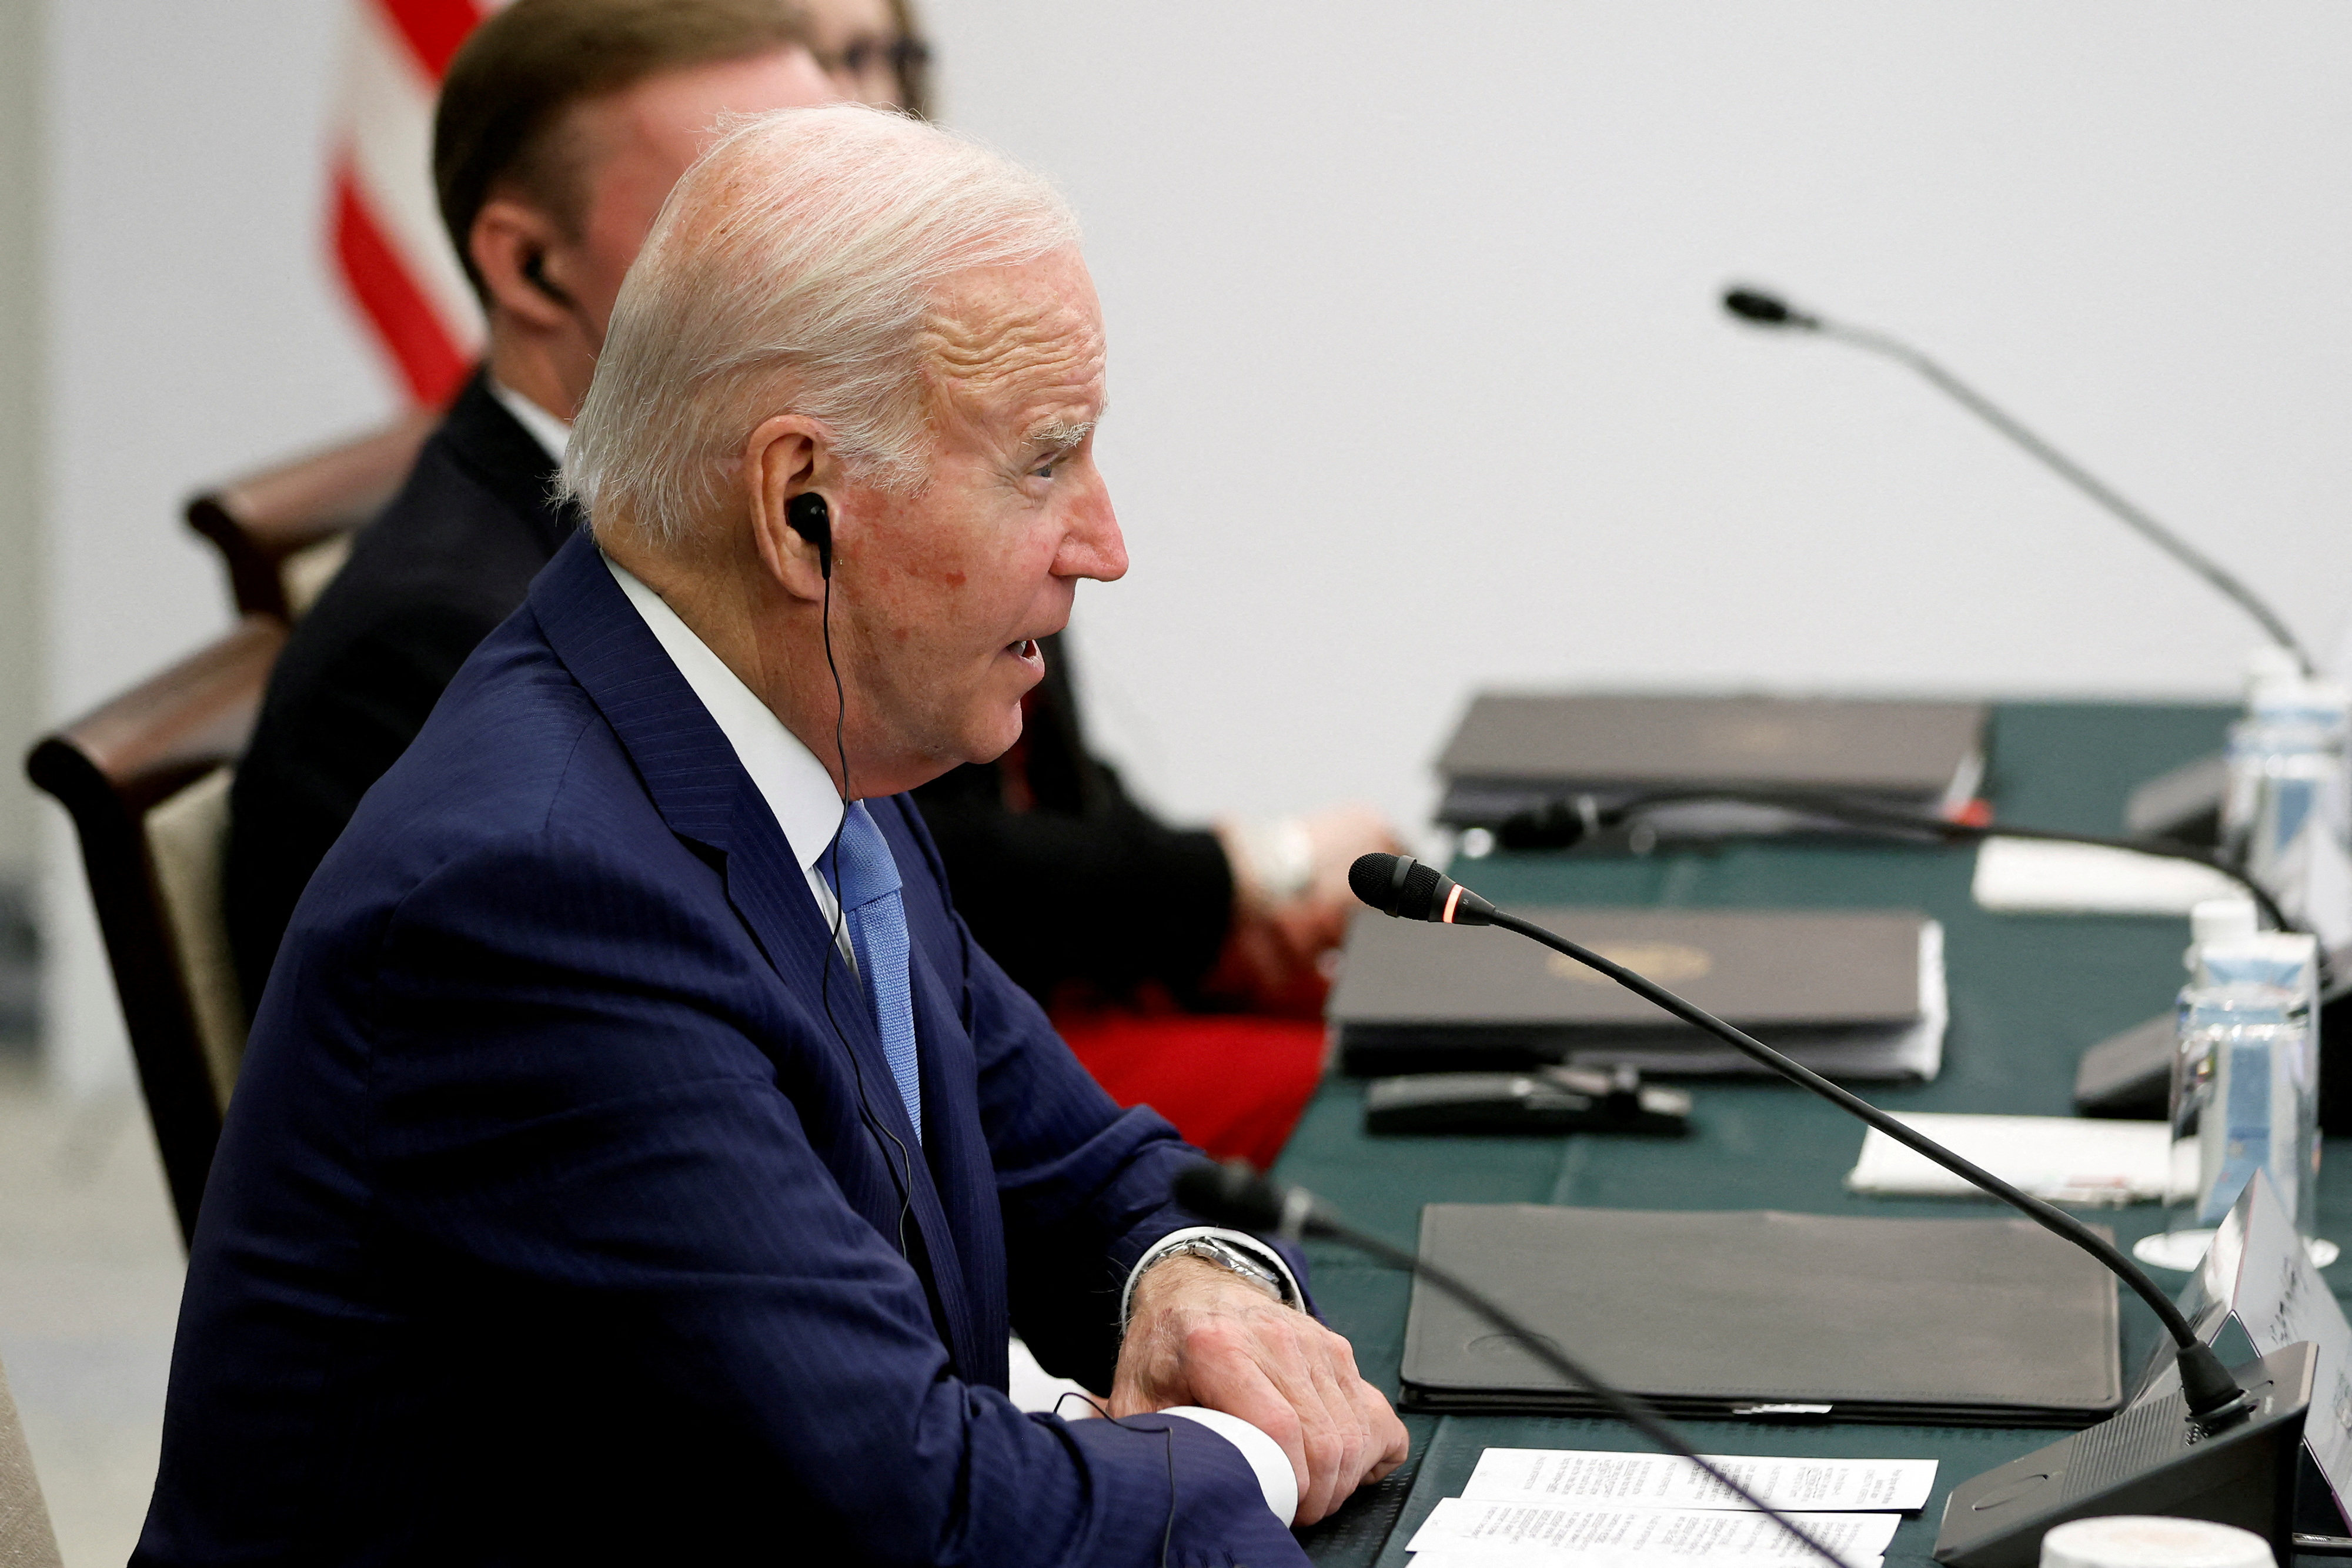 US President Joe Biden speaks during a meeting on Thursday in Hiroshima, Japan, ahead of the Group of 7 summit. Photo: Reuters